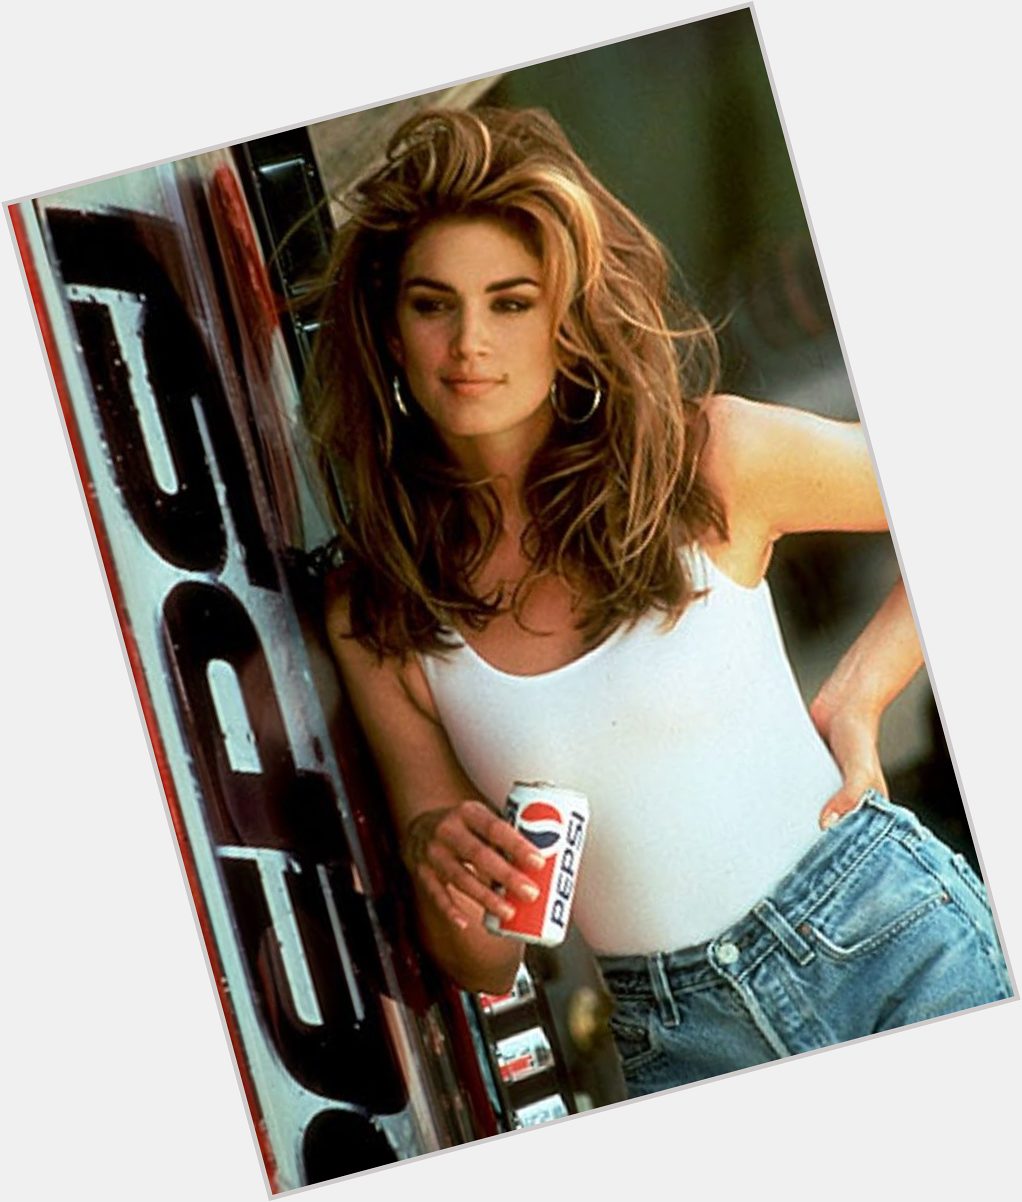 Happy Birthday Cindy Crawford.

The most beautiful woman on this planet   